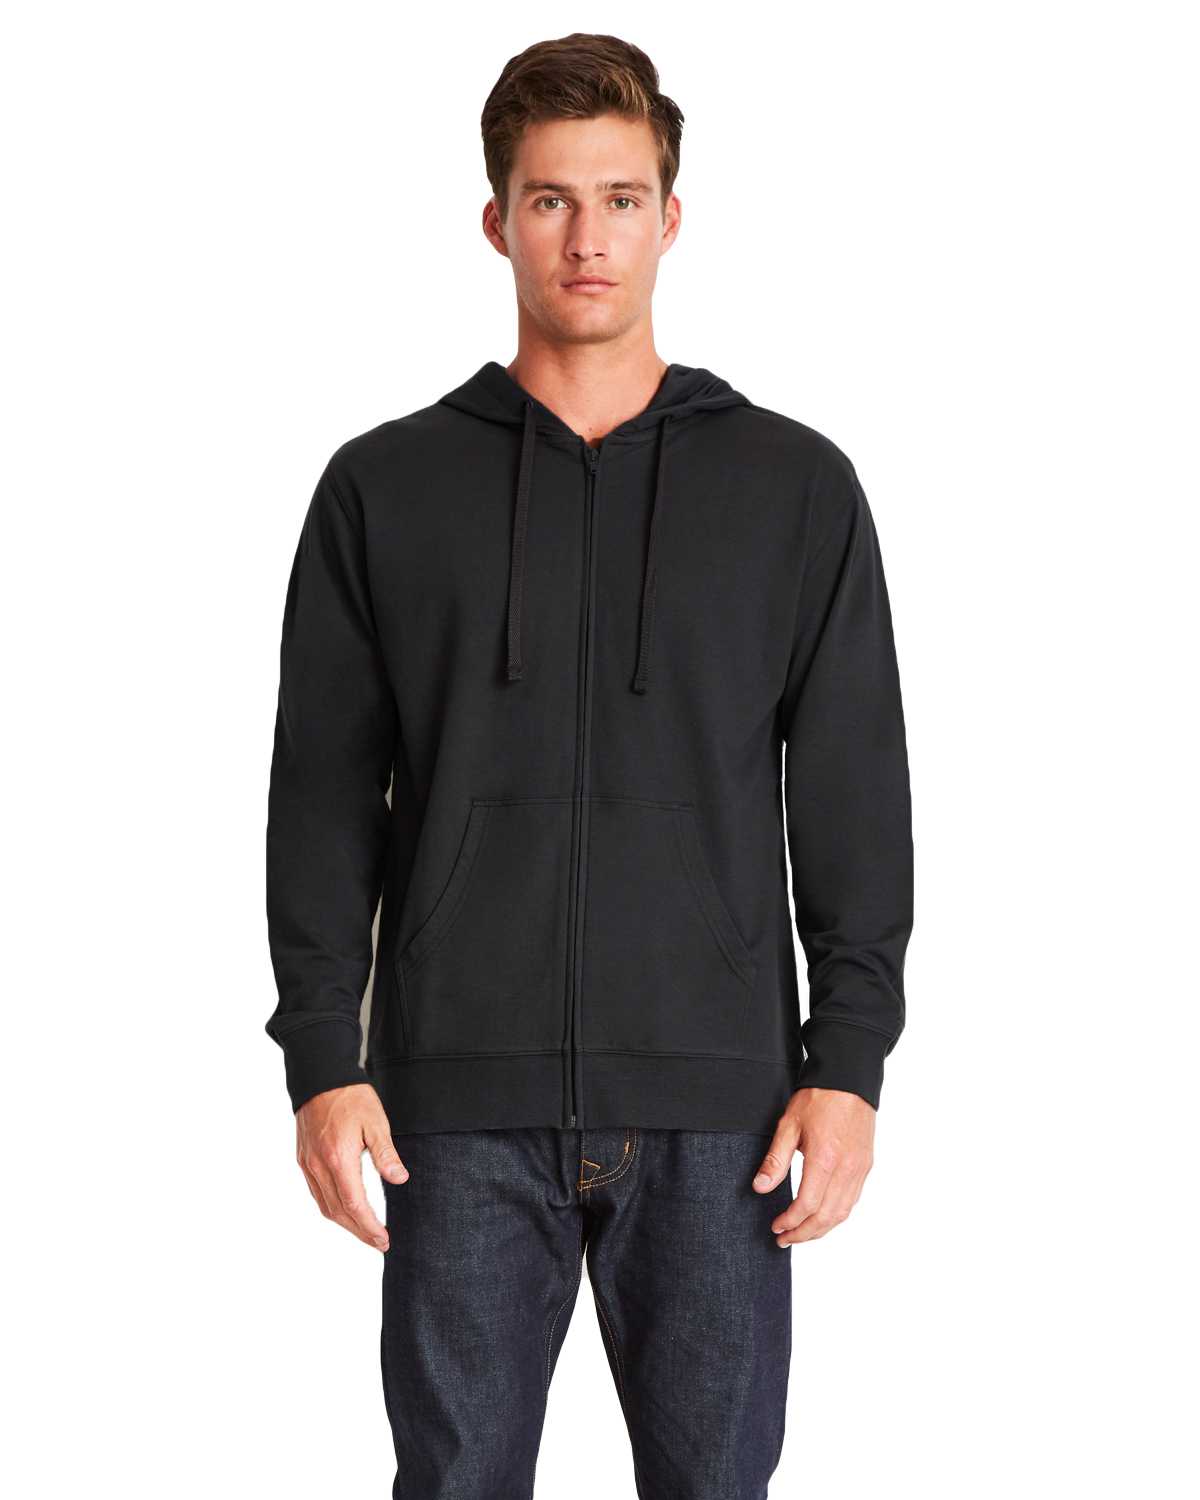 Next Level 9601 Adult French Terry Zip Hoody | ApparelChoice.com